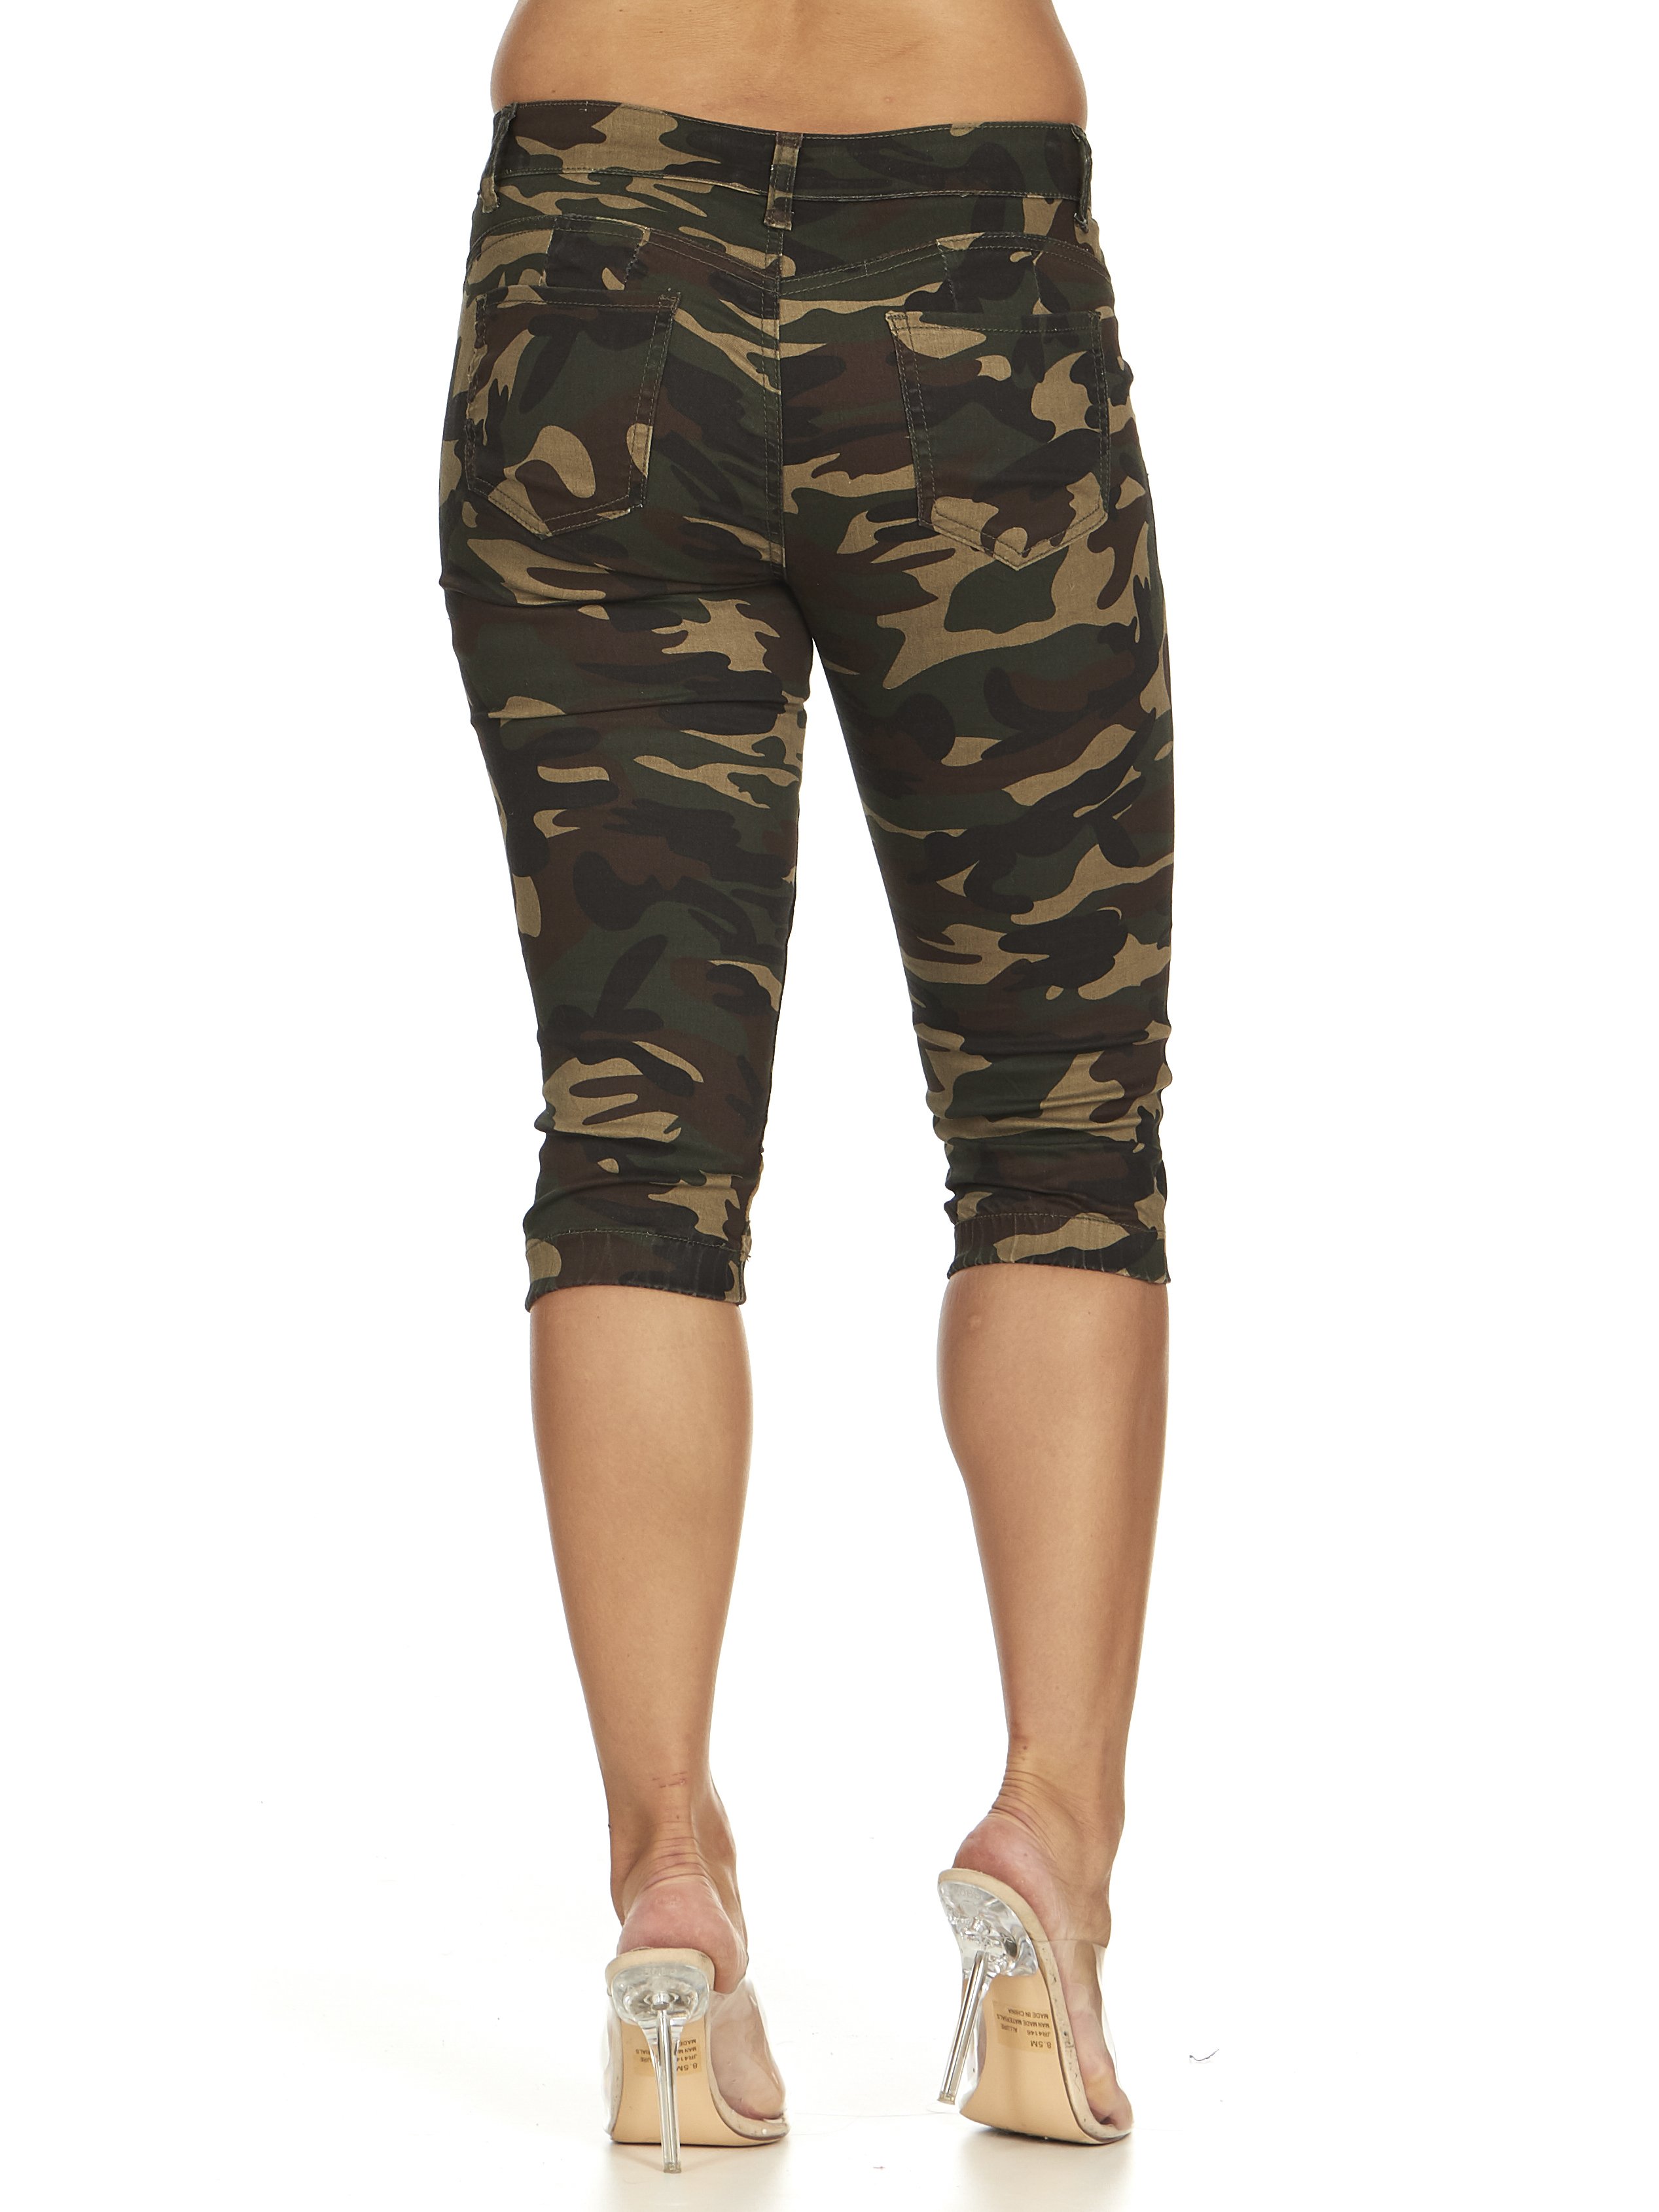 Cute Teen Girl Junior's Plus Size Cute Camo Denim Mid Rise High Waisted Jeans Shorts, Army Button, 16 - image 3 of 7